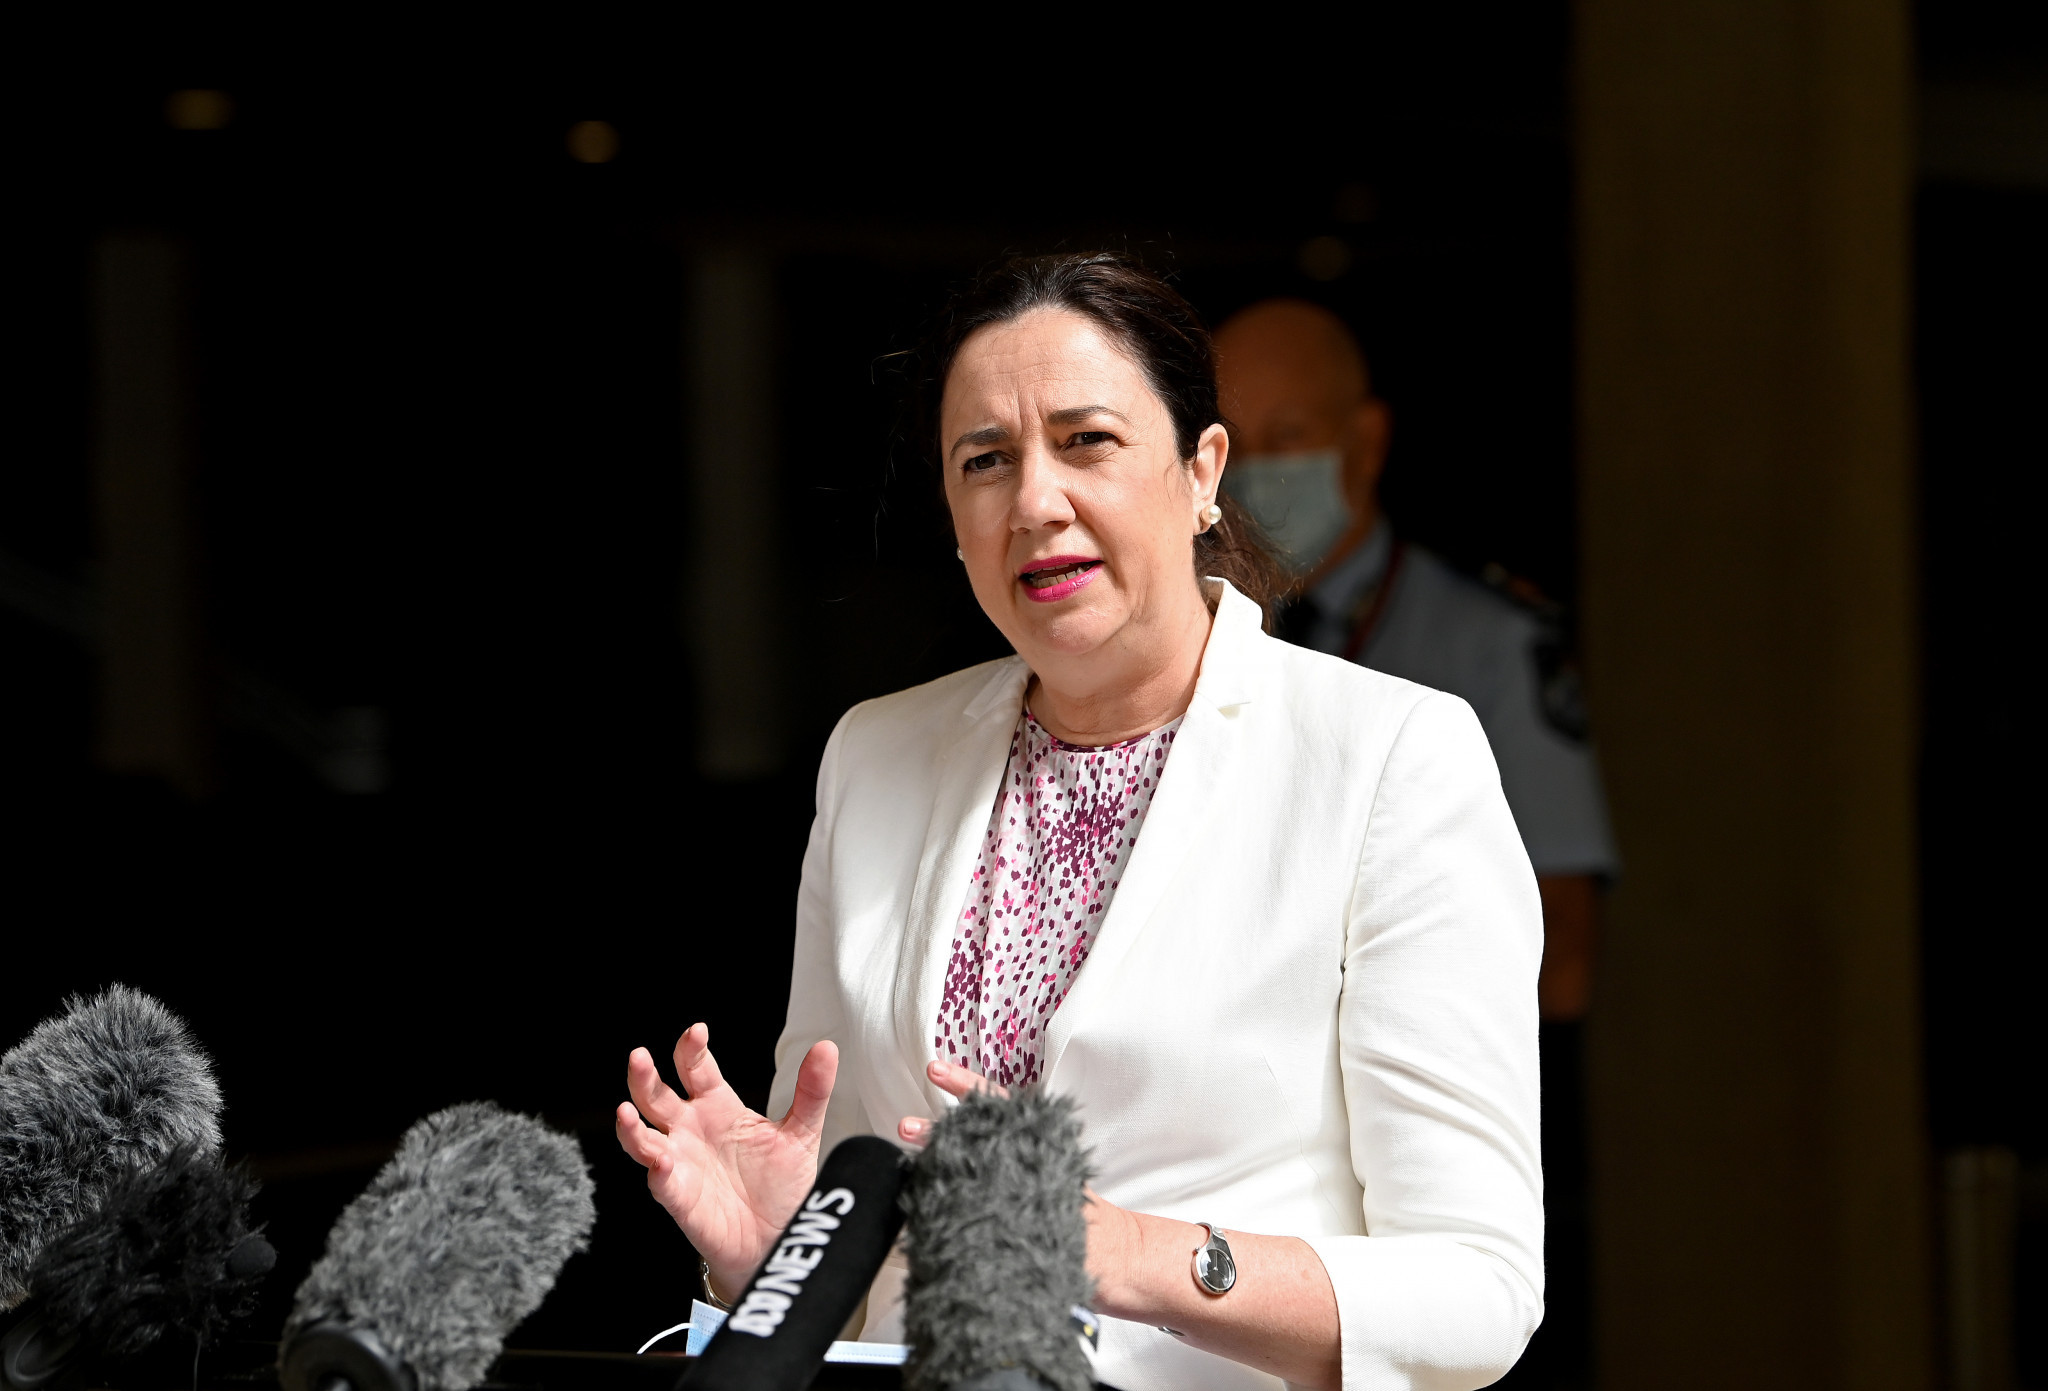 Queensland Premier Annastacia Palaszczuk will meet with Anthony Albanese shortly after returning from her leave ©Getty Images